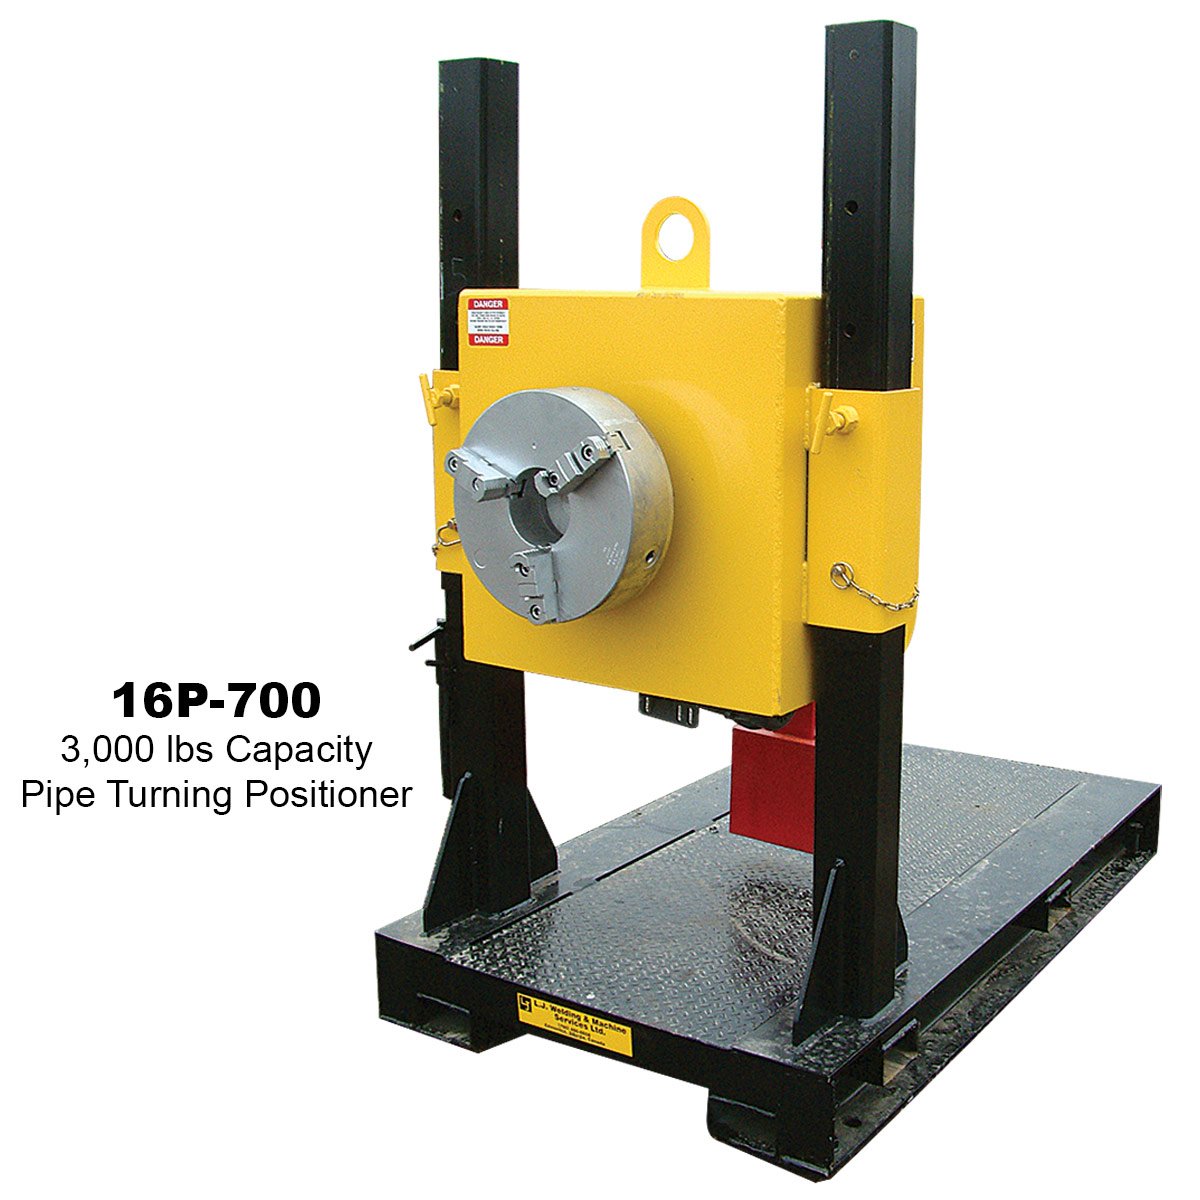 01-3000lb-Pipe-Turning-Positioner